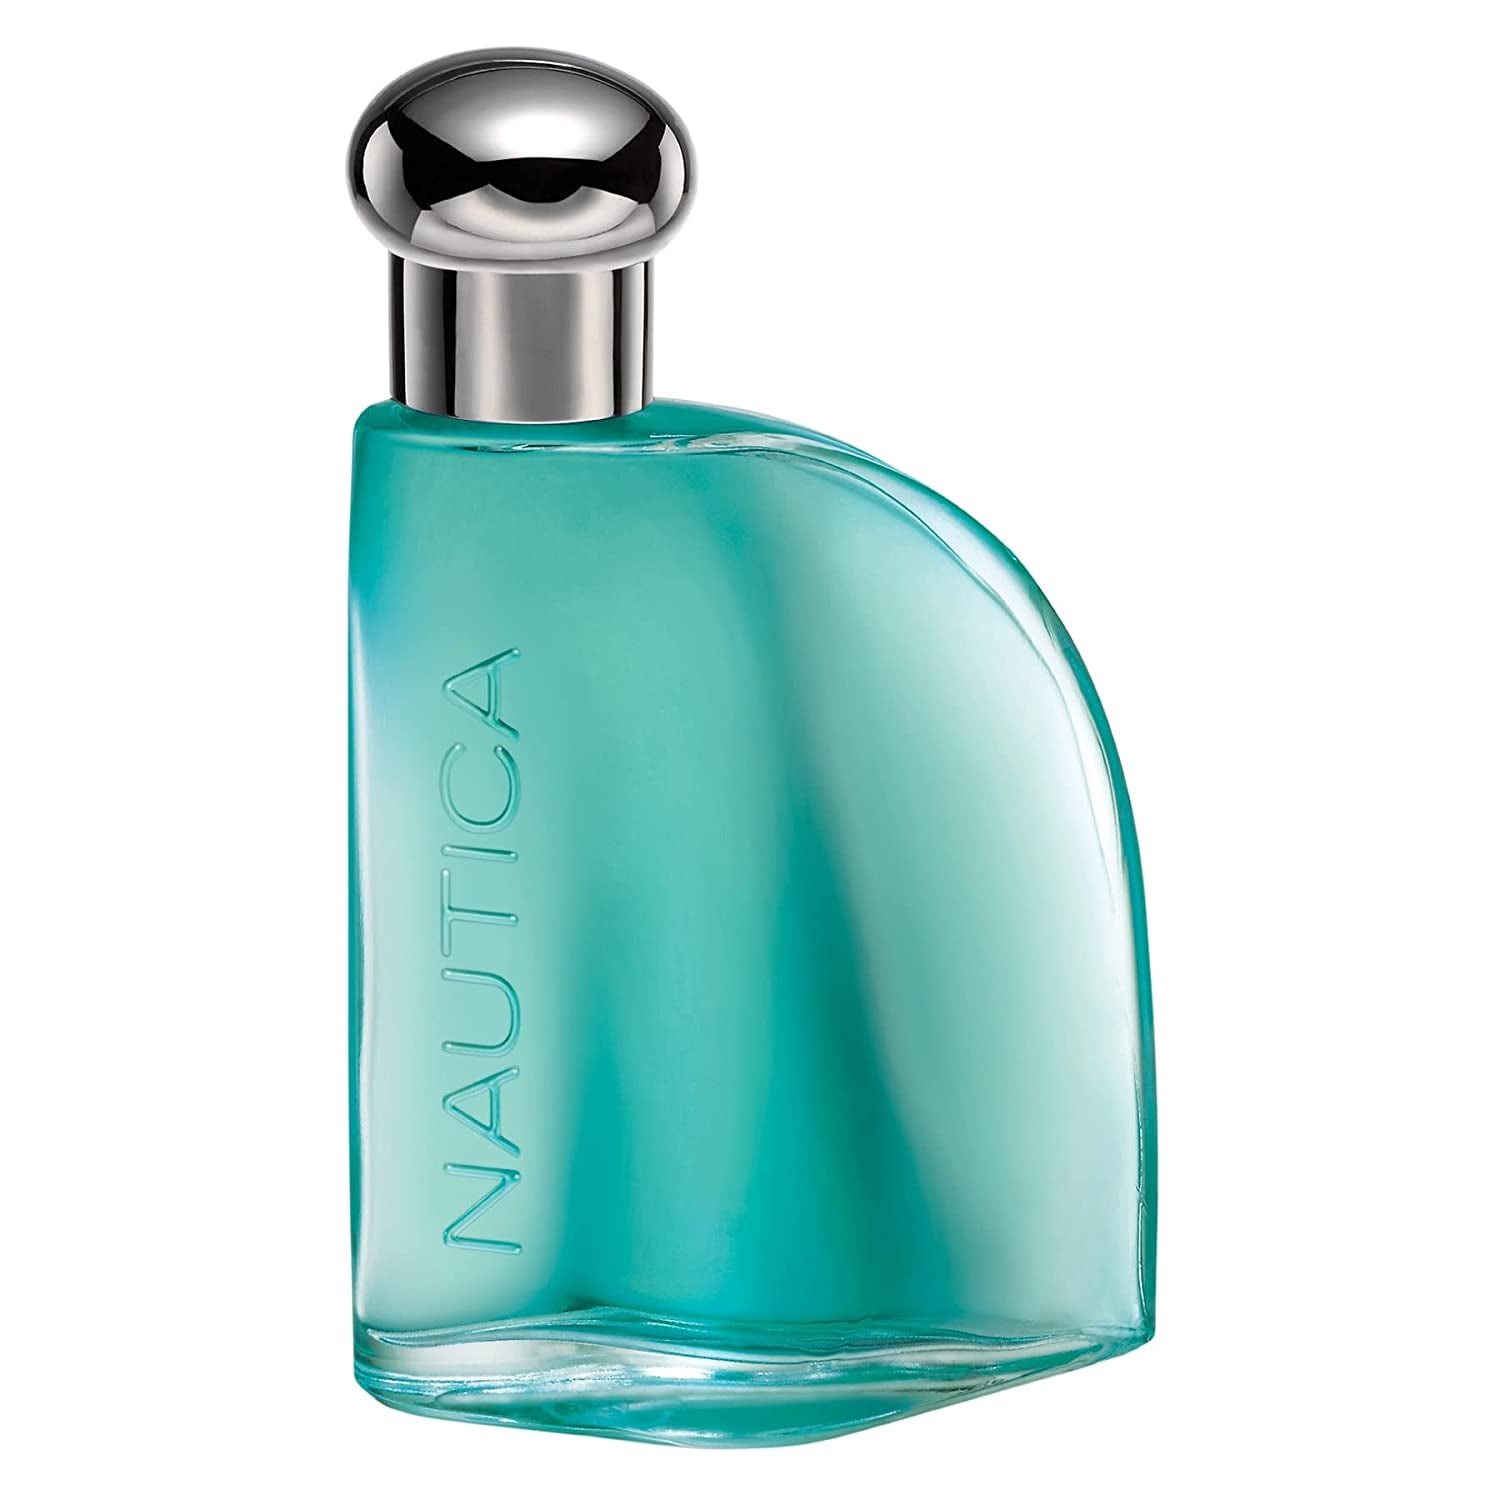 Nautica Classic Eau de Toilette for Men - Citrusy and Earthy Scent - Aromatic Notes of Bergamot, Jasmine, and Musk - Great for Everyday Wear - 3.4 Fl Oz